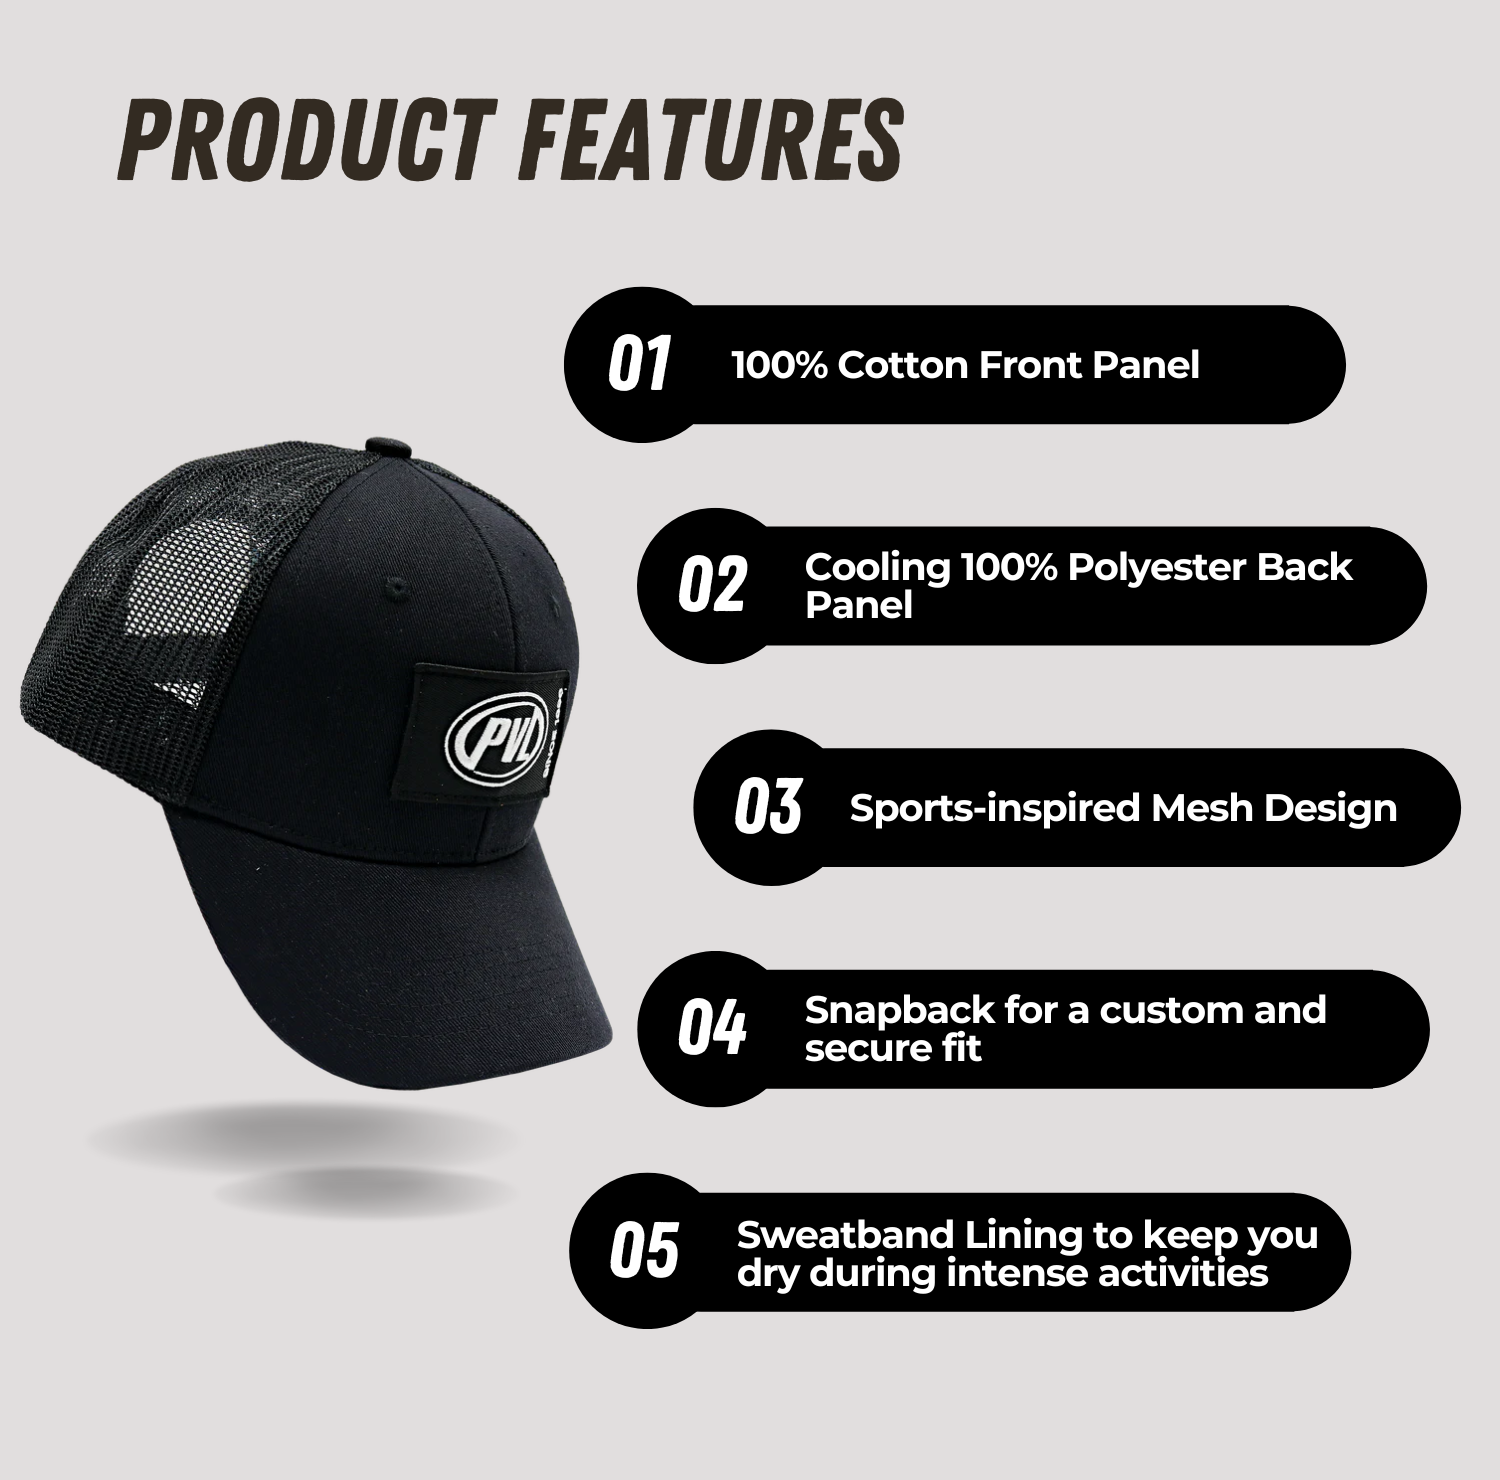 PVL Patched Athletes Trucker Cap, Sport Hat, Adjustable Snapback, Various Color, 1 Pcs, Product Features